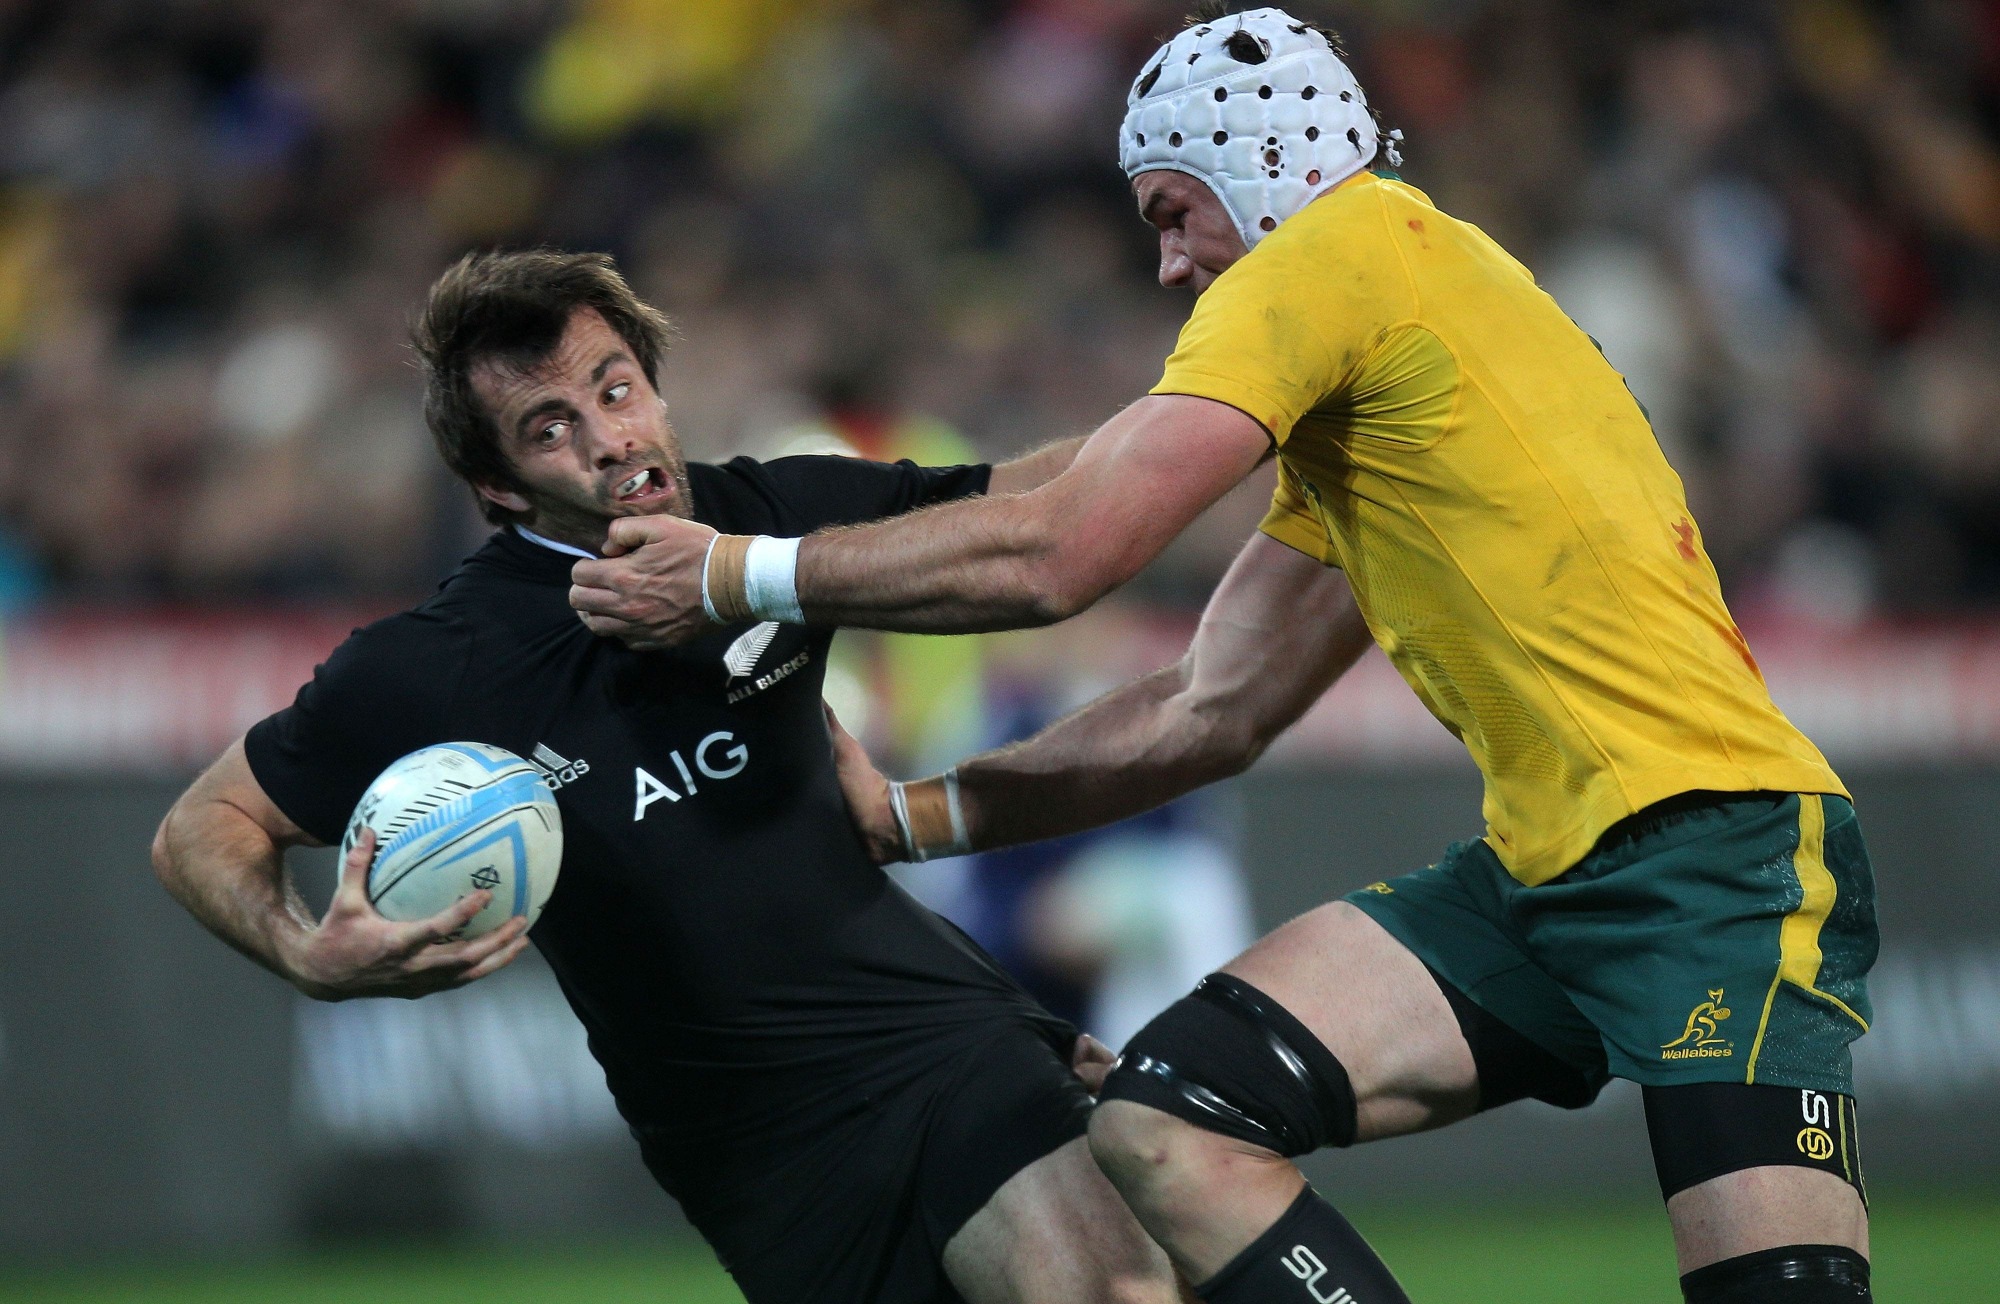 Conrad Smith (L) of New Zealand is tackled by Ben Mowen of Australia during the 2nd Bledisloe Cup game rugby union match between the New Zealand All Blacks and Australia at the Westpac Stadium in Wellington on Saturday. Photo: AFP